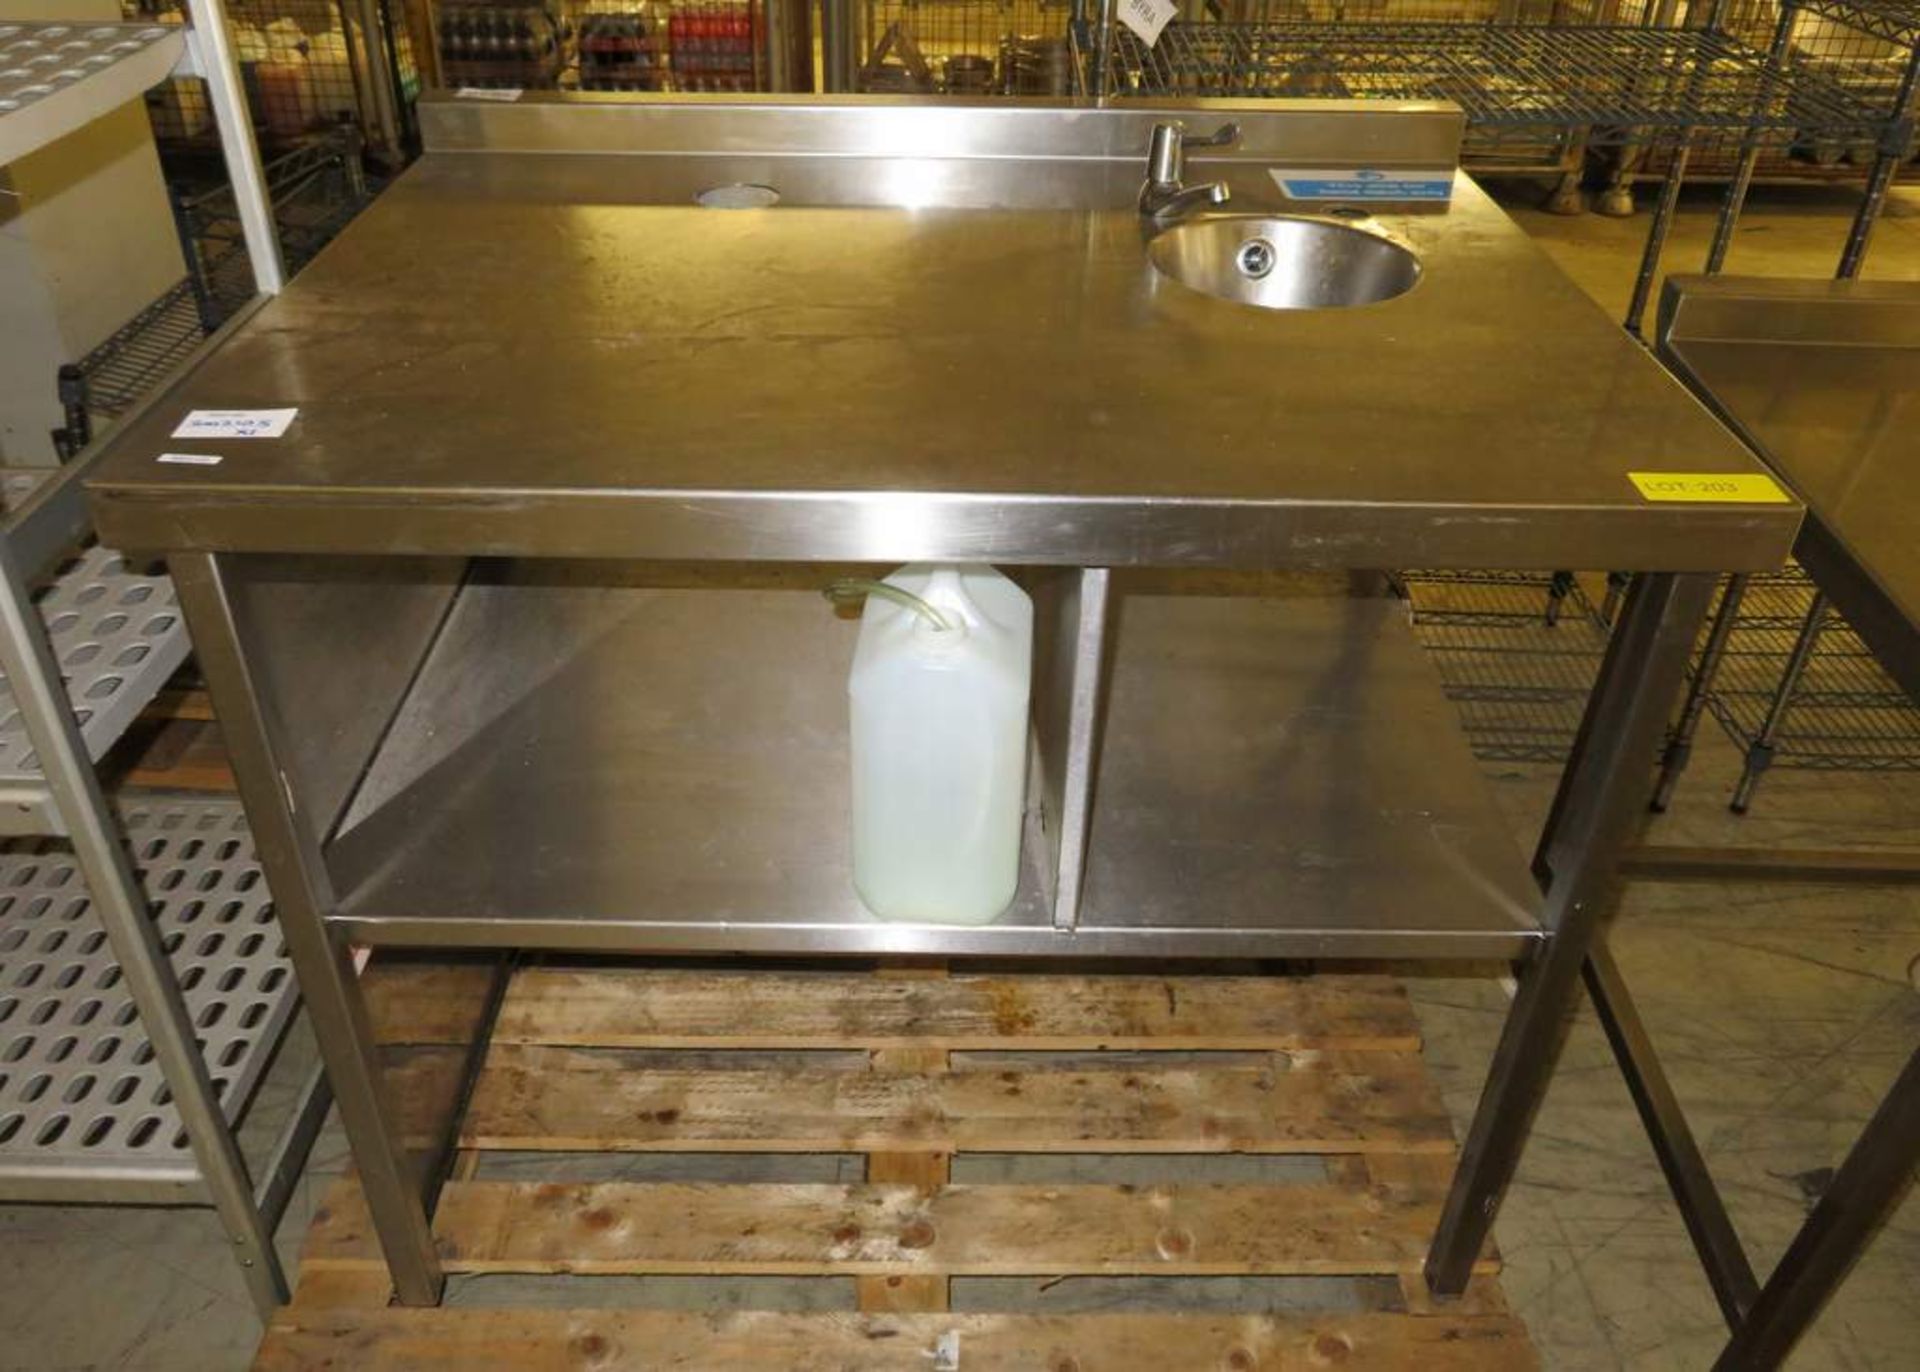 Stainless steel kitchen preparation table with sink